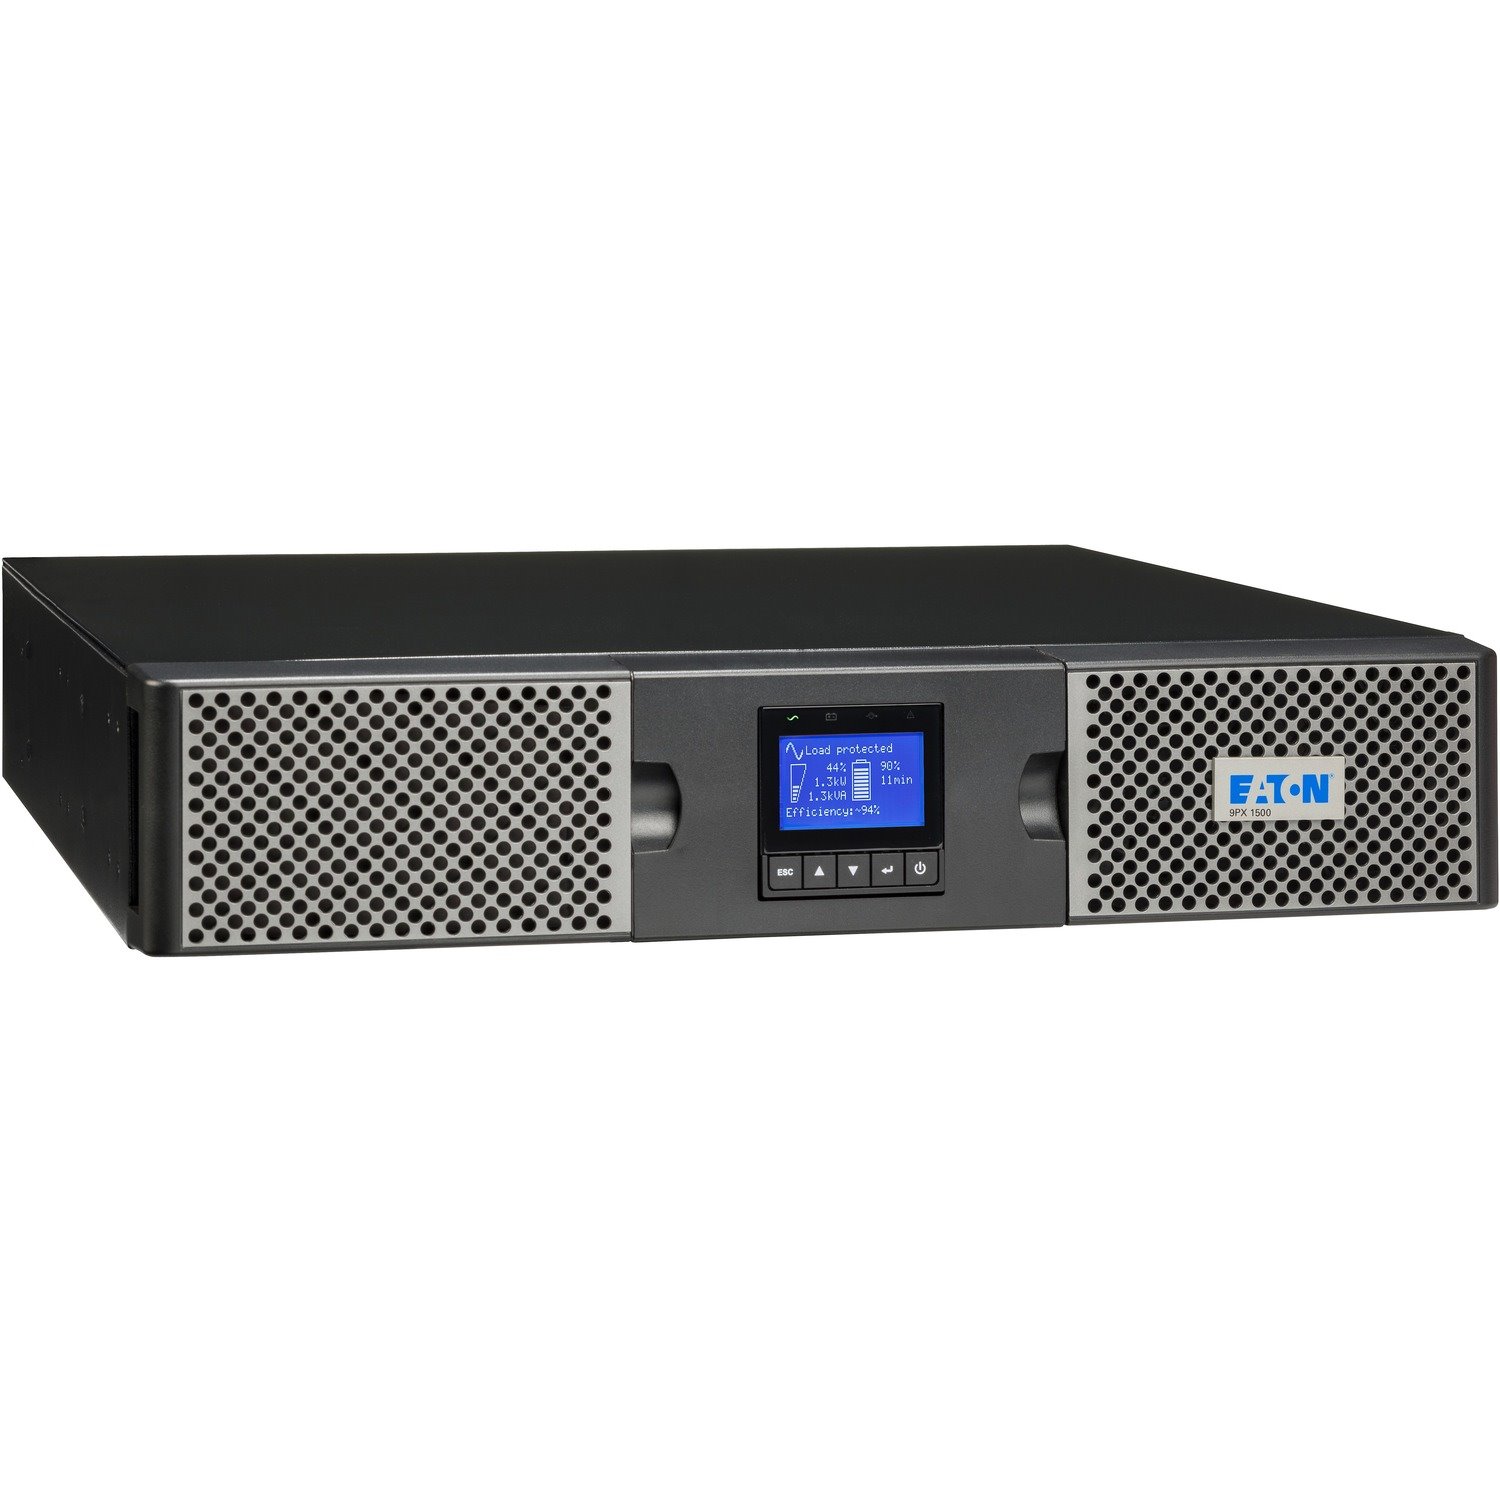 Eaton 9PX 1500VA 1350W 120V Online Double-Conversion UPS - 5-15P, 8x 5-15R Outlets, Cybersecure Network Card Option, Extended Run, 2U Rack/Tower